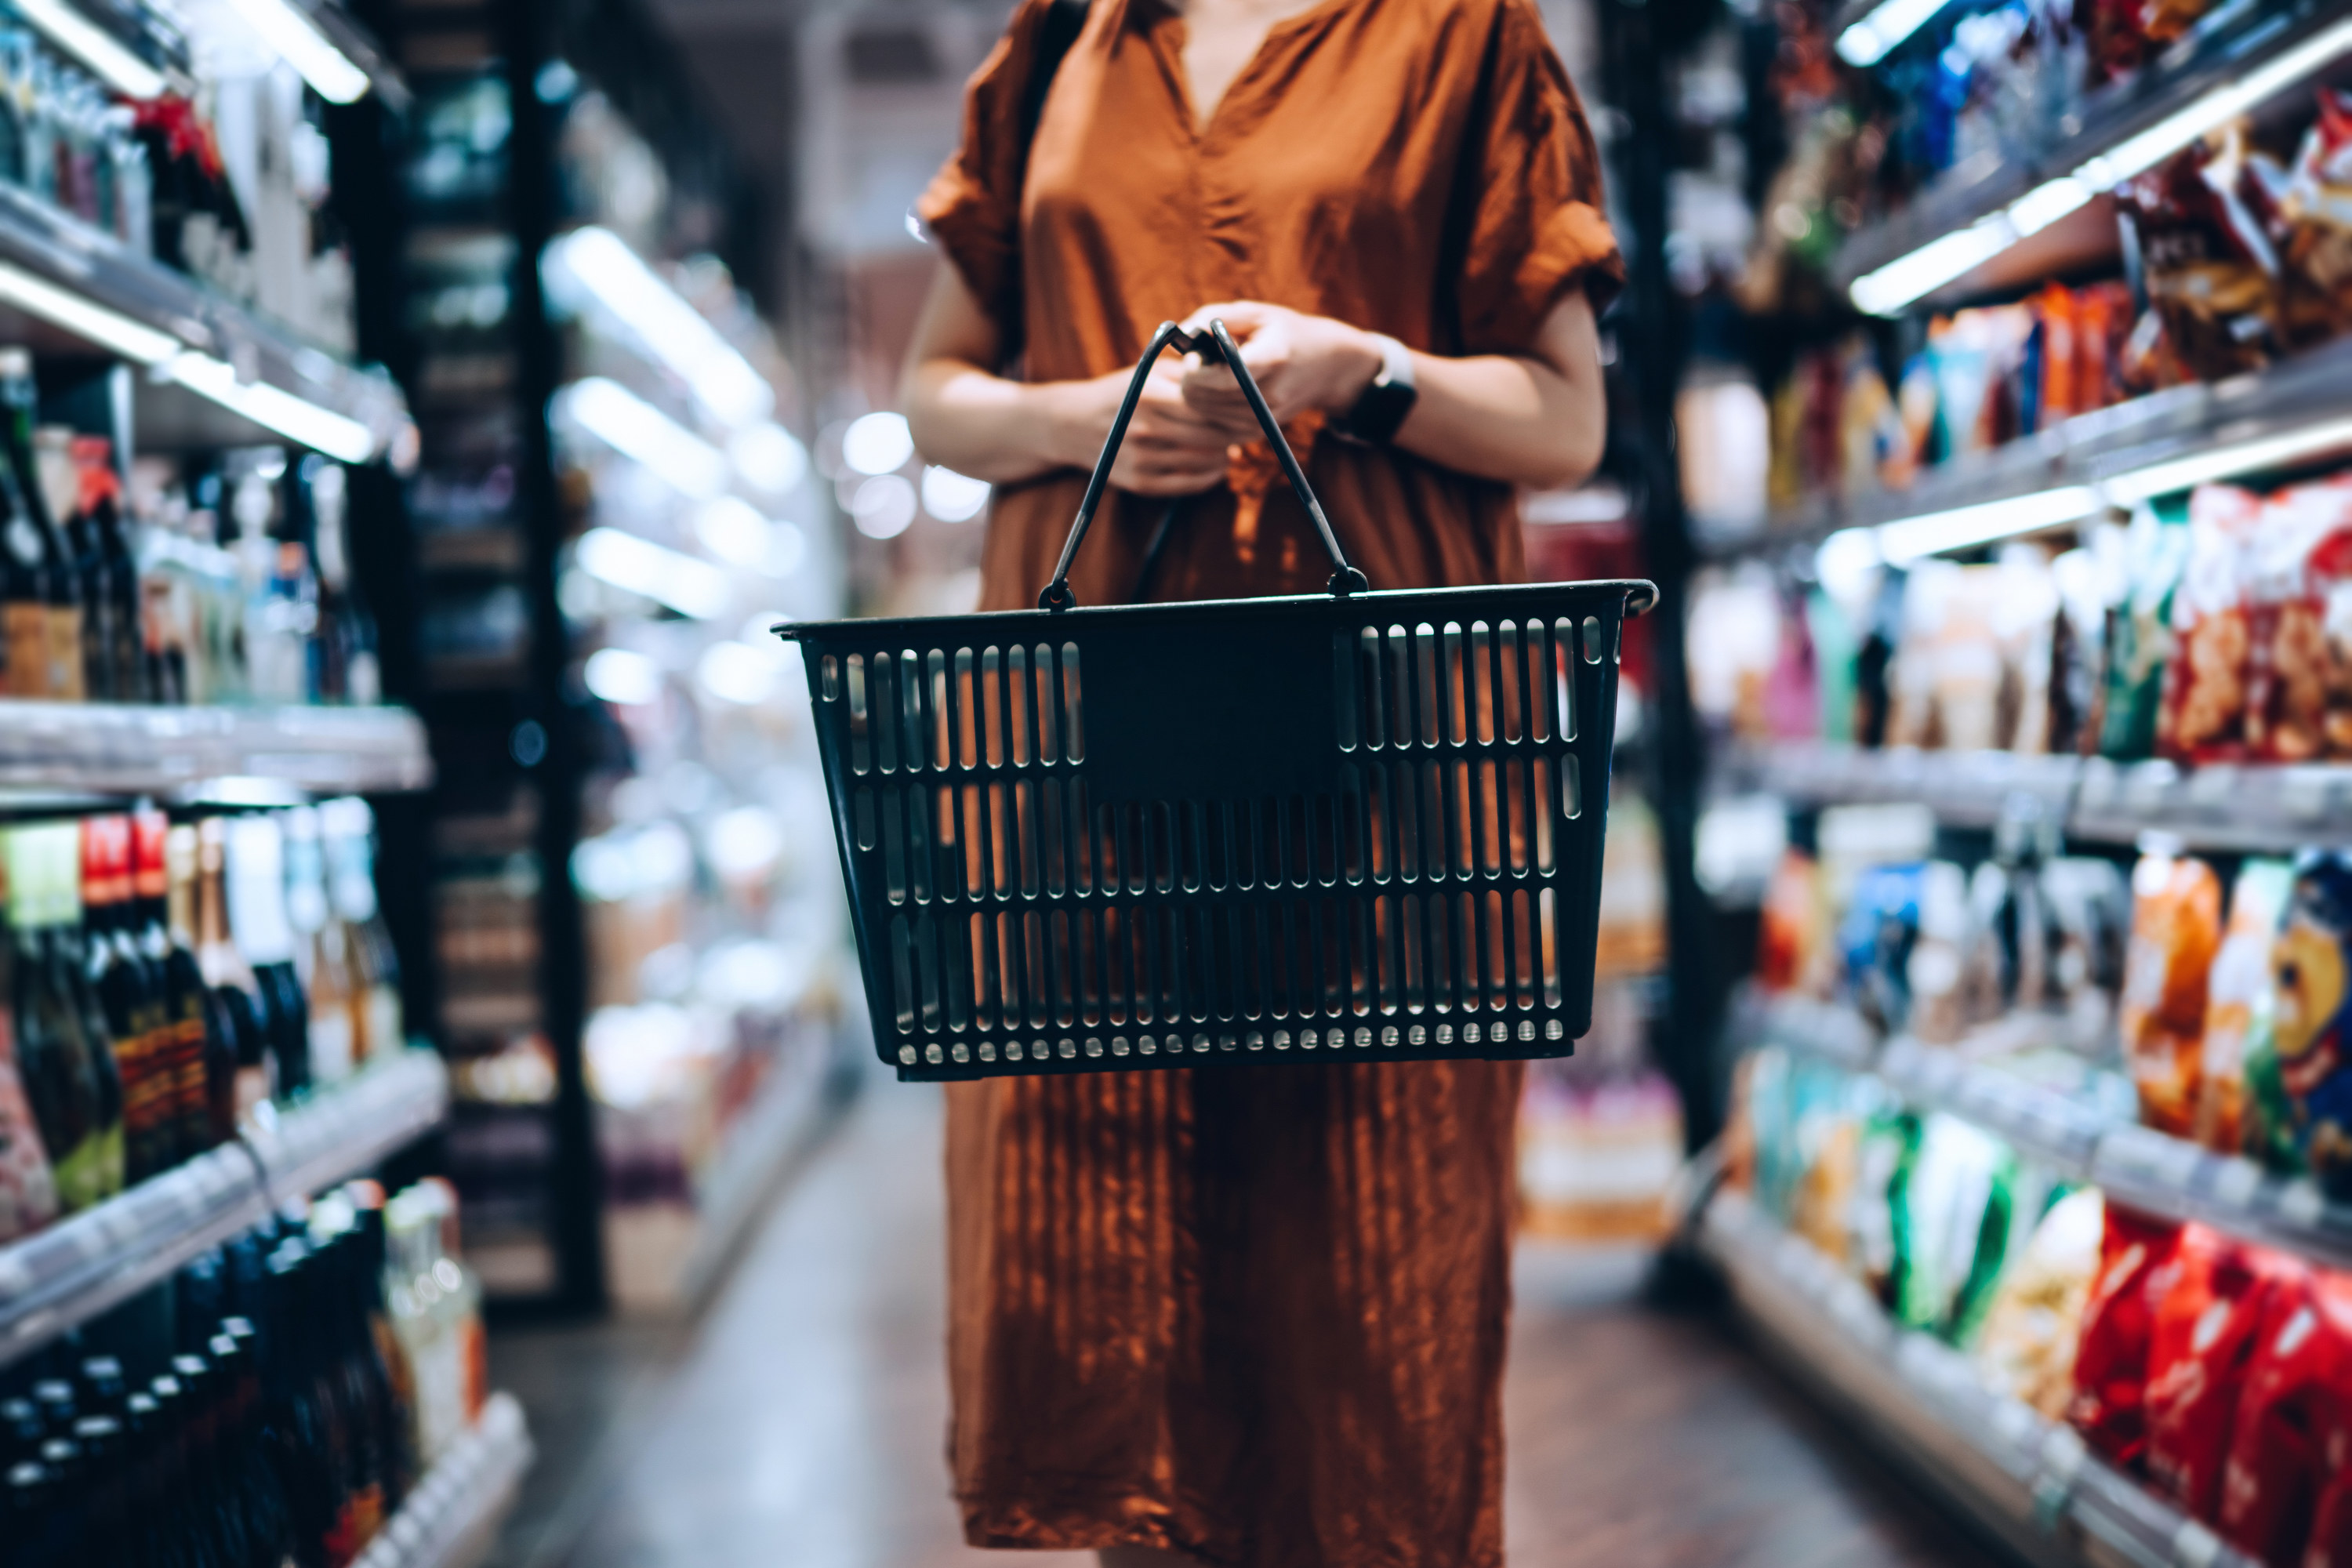 Person in grocery store holding a basket